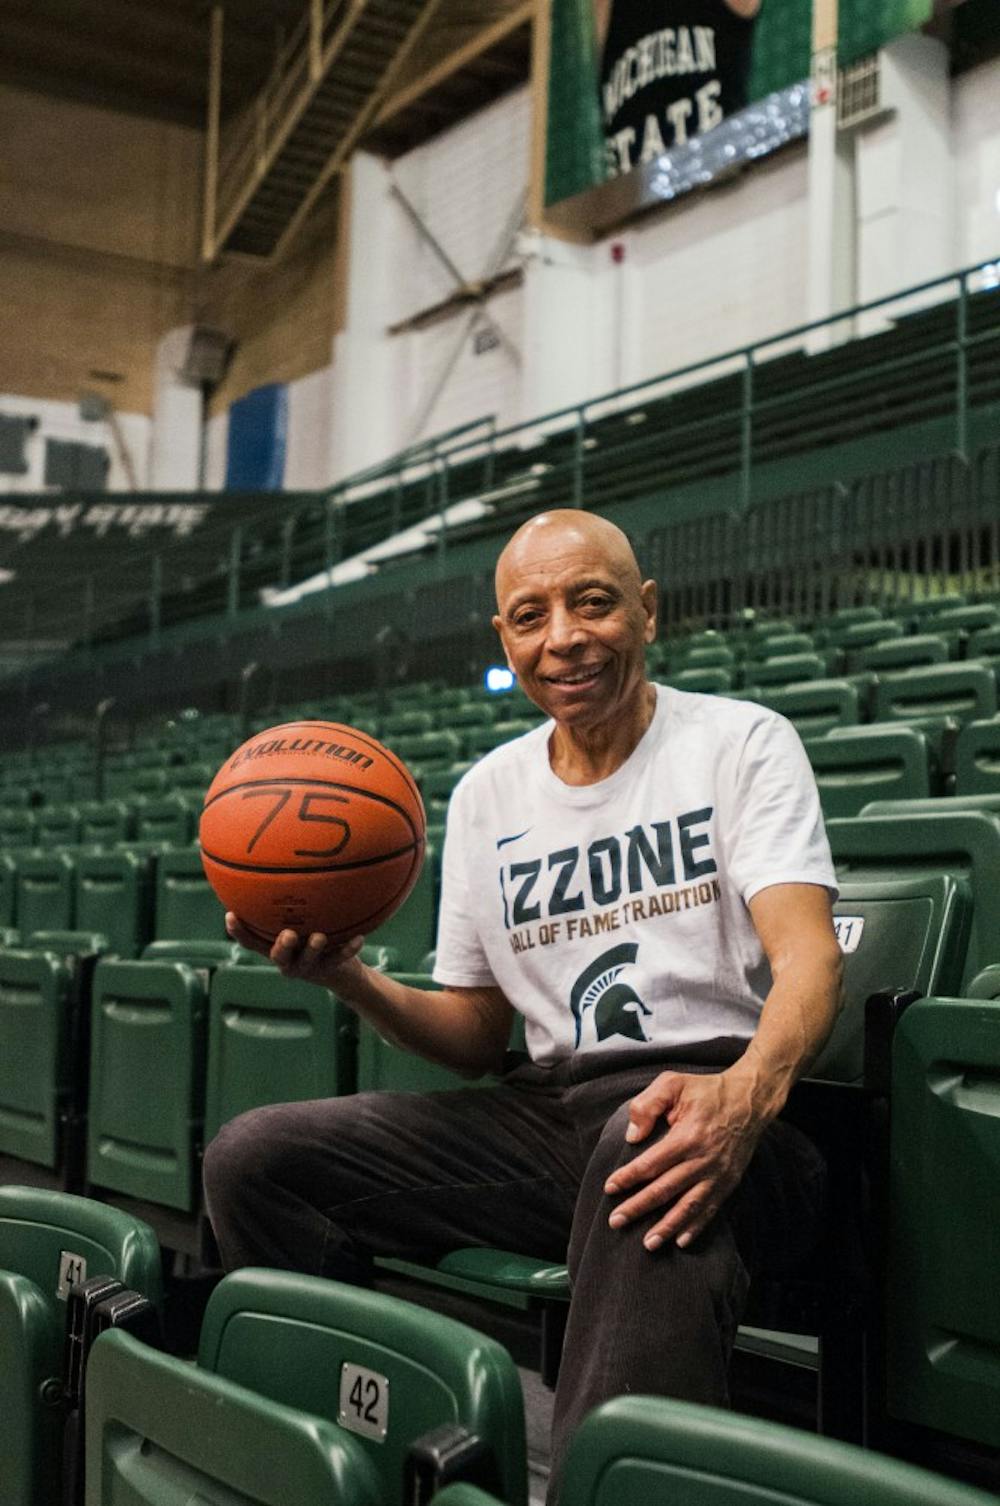 East Lansing resident James Cummings, 75, shows off his basketball marked with his age, that he uses to defeat any and all challengers in the childhood favorite game of H.O.R.S.E. on Jan. 12, 2018 at Jenison Fieldhouse. "I just love the game of H.O.R.S.E., I think it should be an Olympic sport," James said. (C.J. Weiss | The State News)